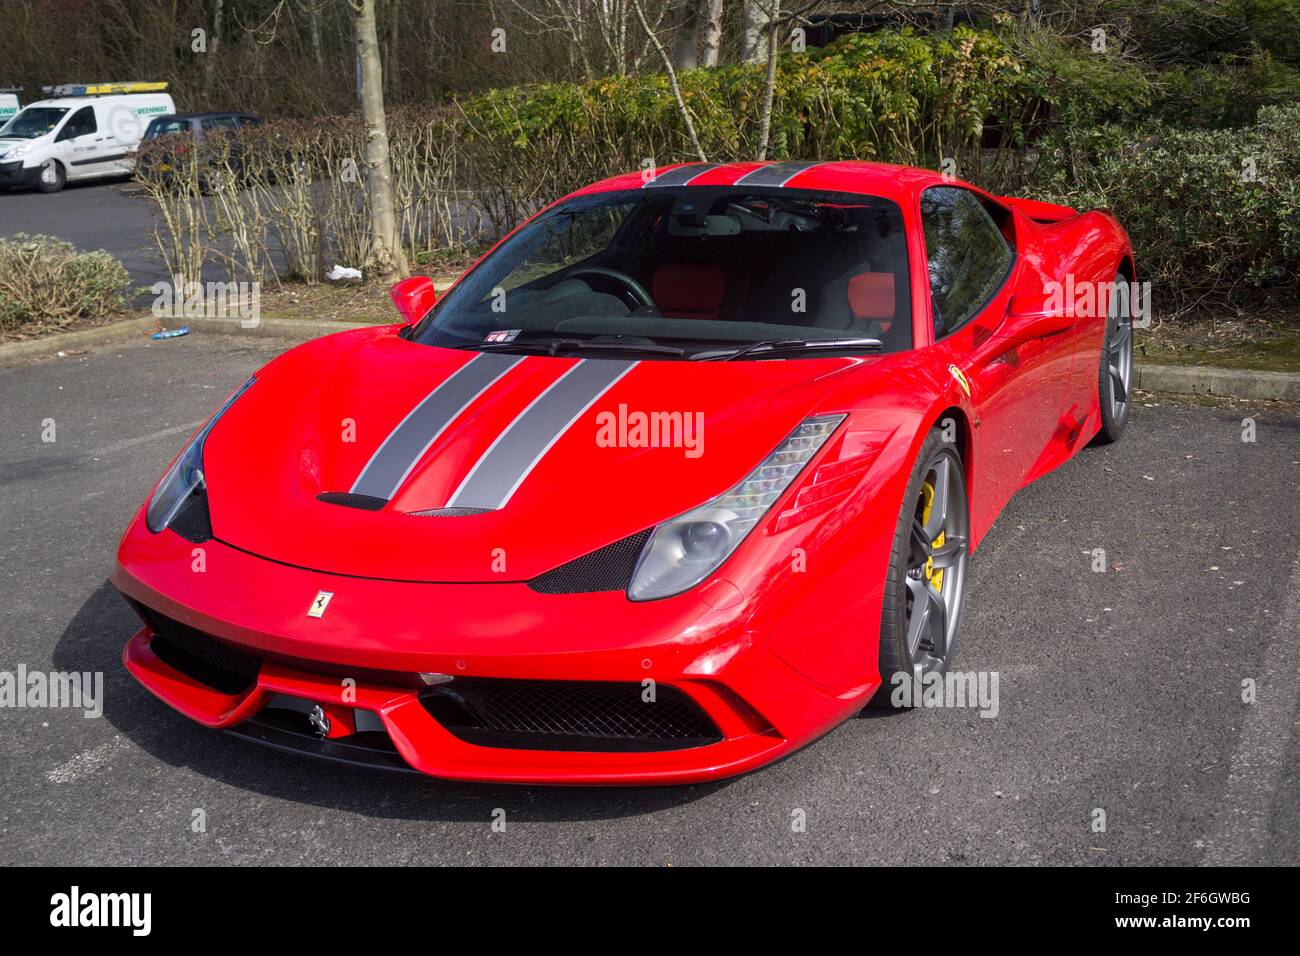 The 2015 Ferrari 458 Speciale In Metallic Red With Dual Grey Stripes From Front To Back Stock Photo